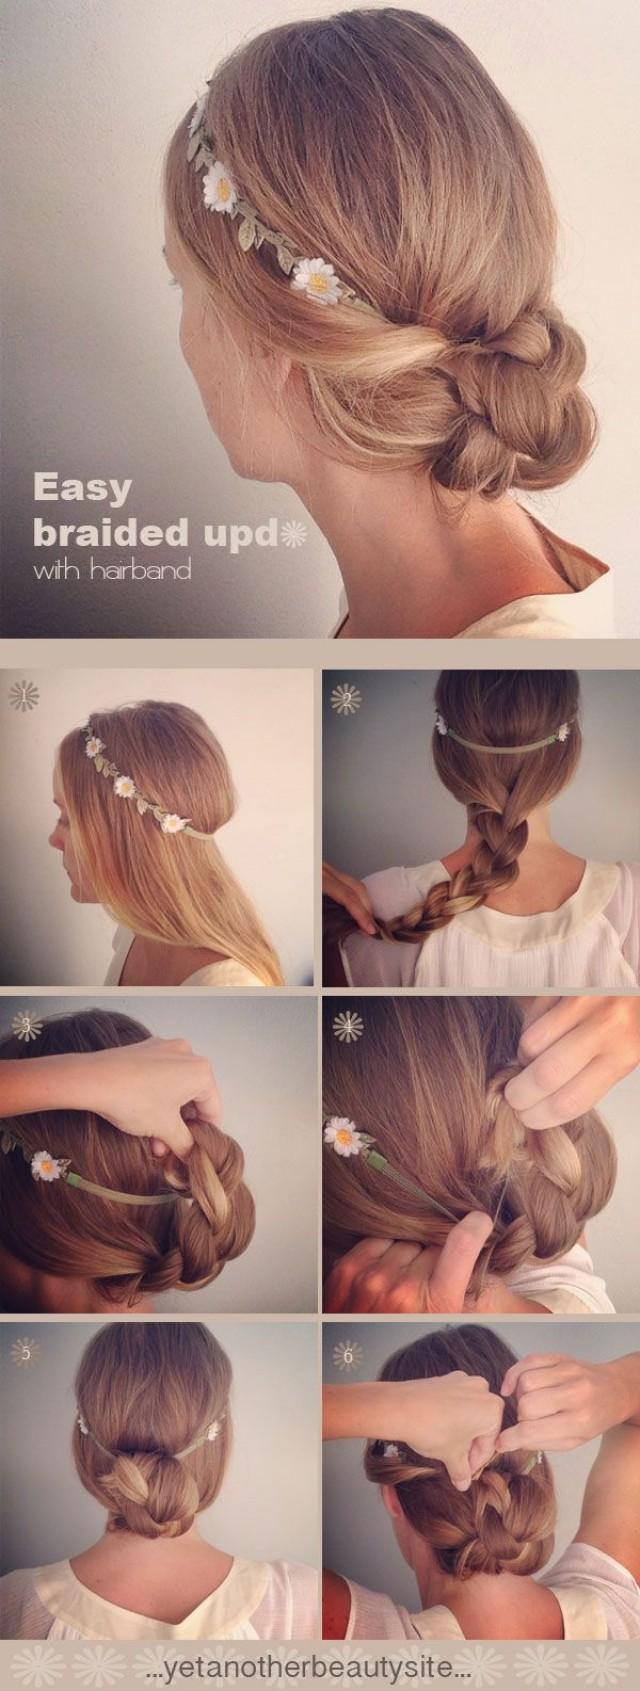 20 DIY Wedding Hairstyles With Tutorials To Try On Your Own 2357396